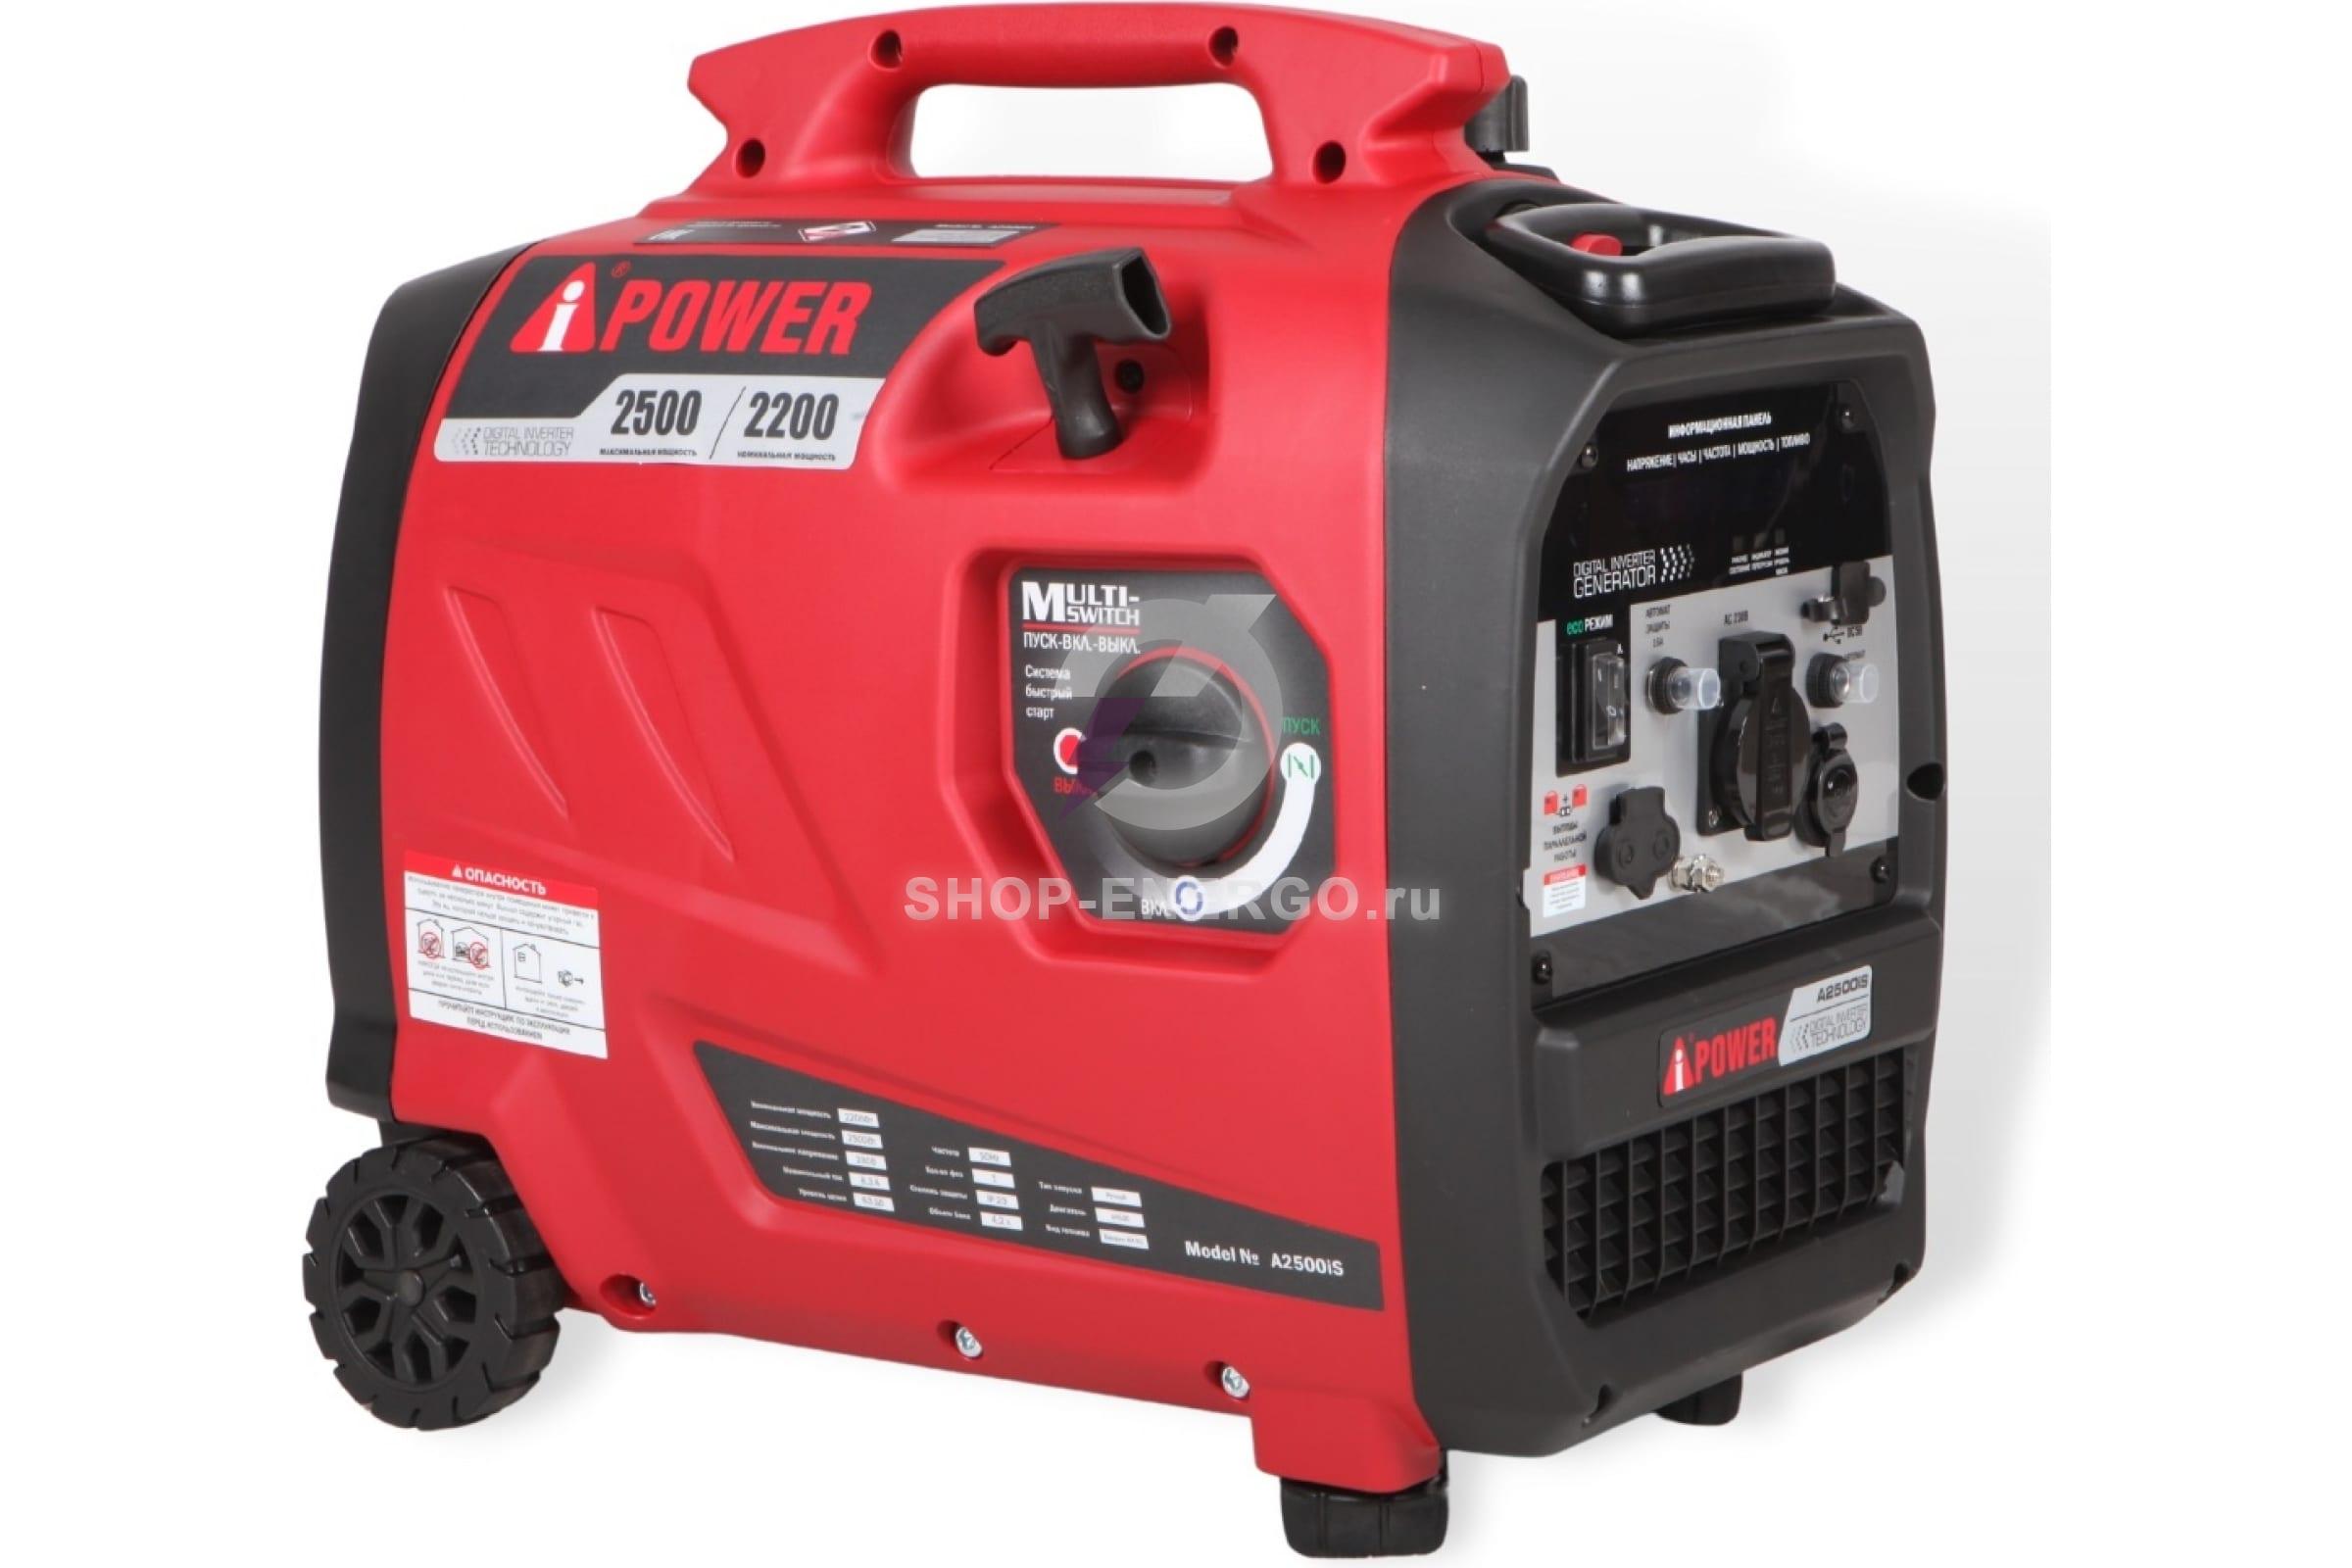   A-iPower A2500iS